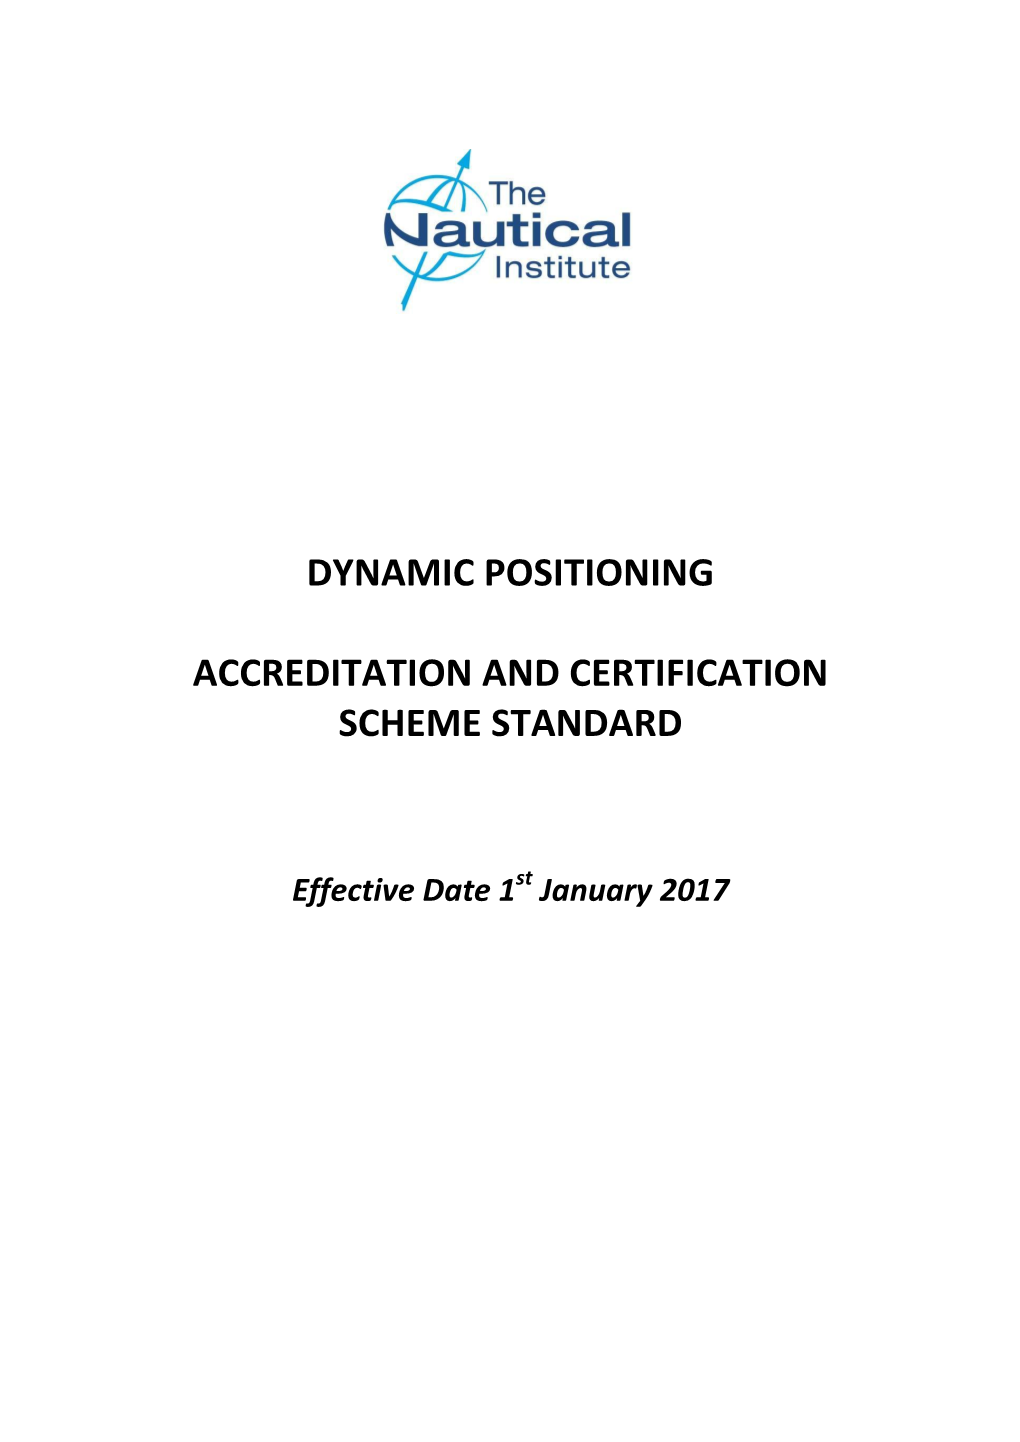 DYNAMIC POSITIONING ACCREDITATION and CERTIFICATION SCHEME STANDARD January 2017